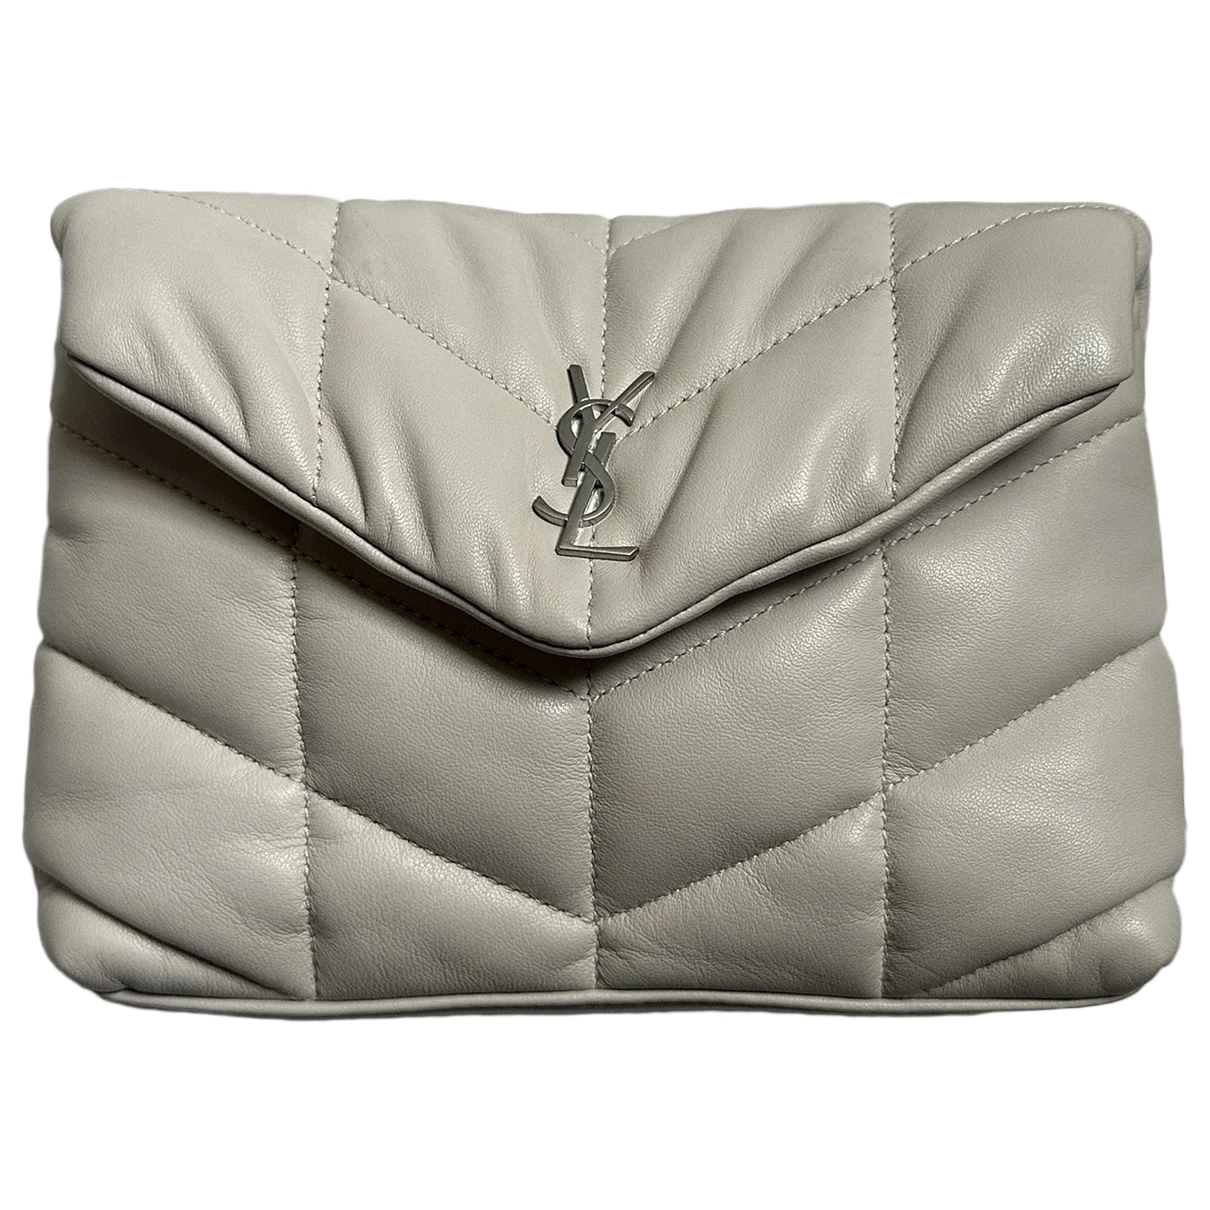 Pre-owned Saint Laurent Pony-style Calfskin Clutch Bag In White